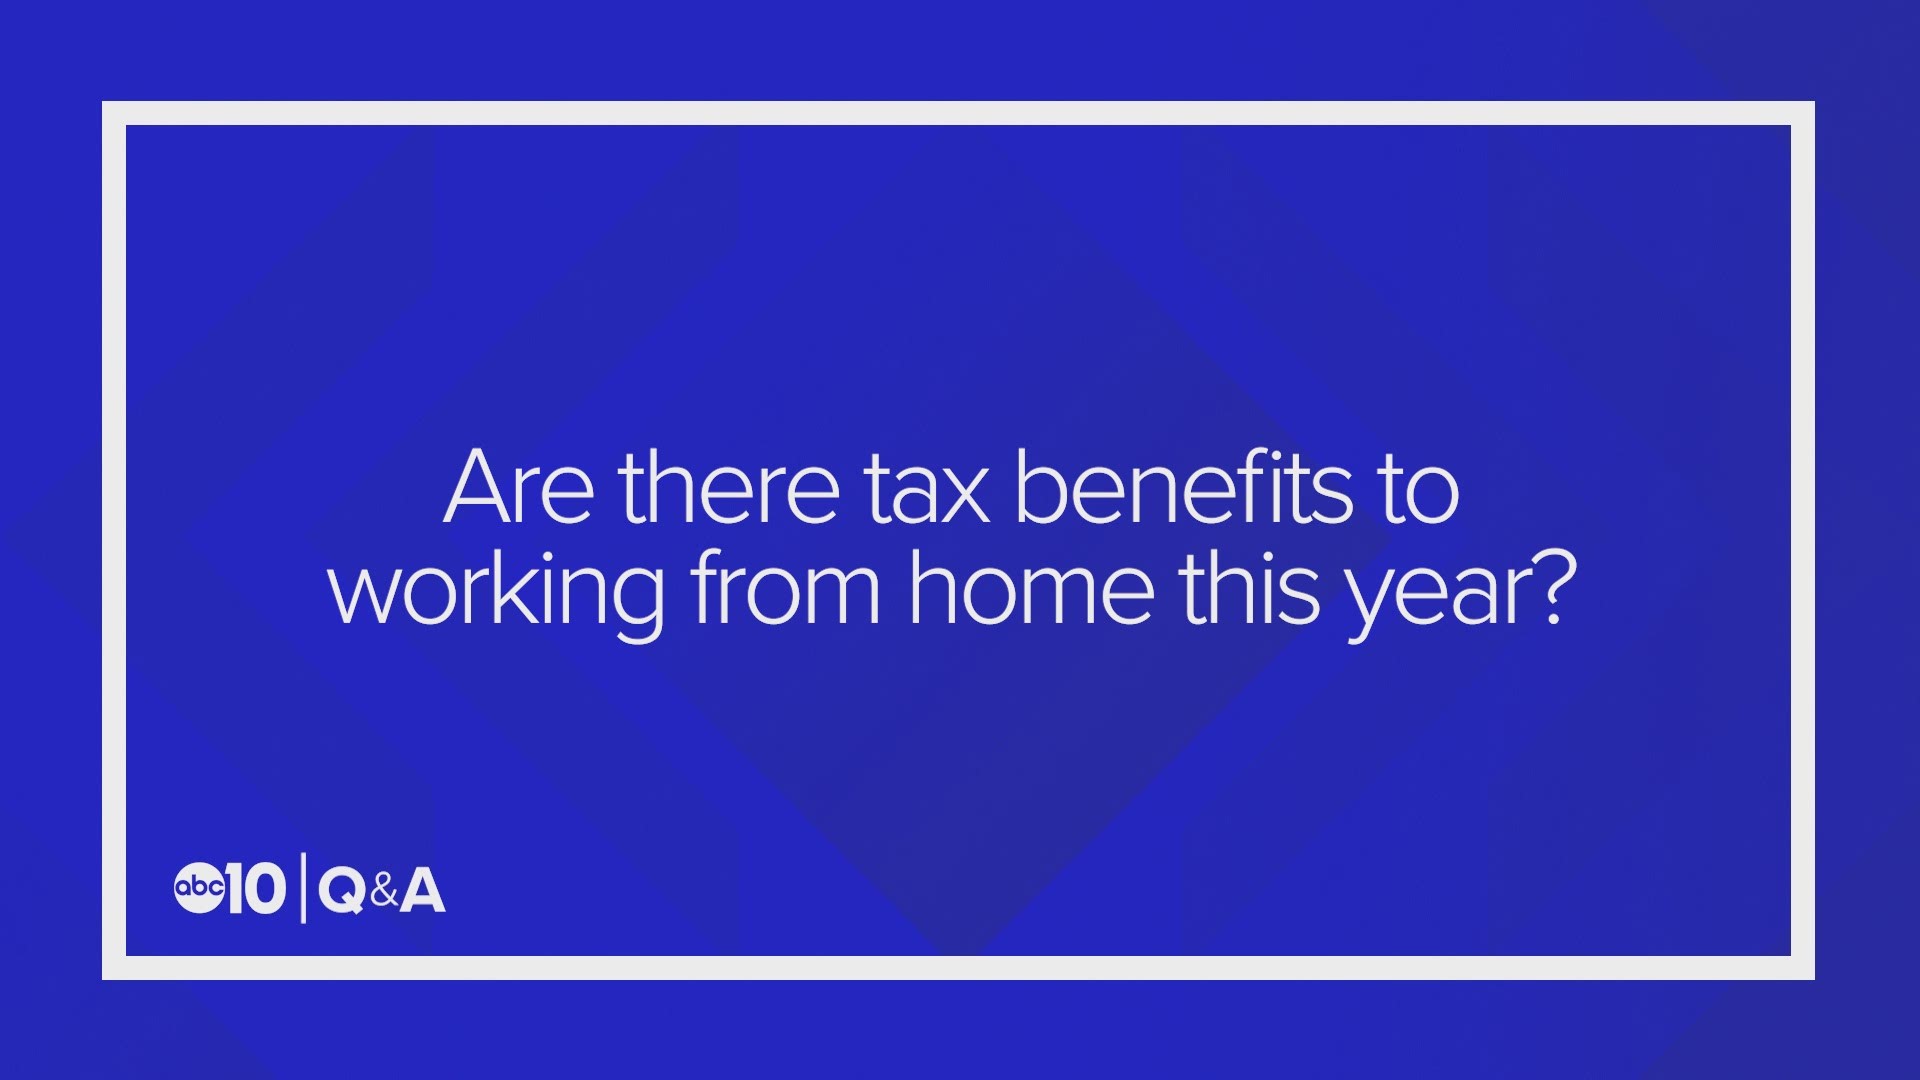 A tax expert says employees looking to deduct the cost of working from home likely won't be able to write anything off.